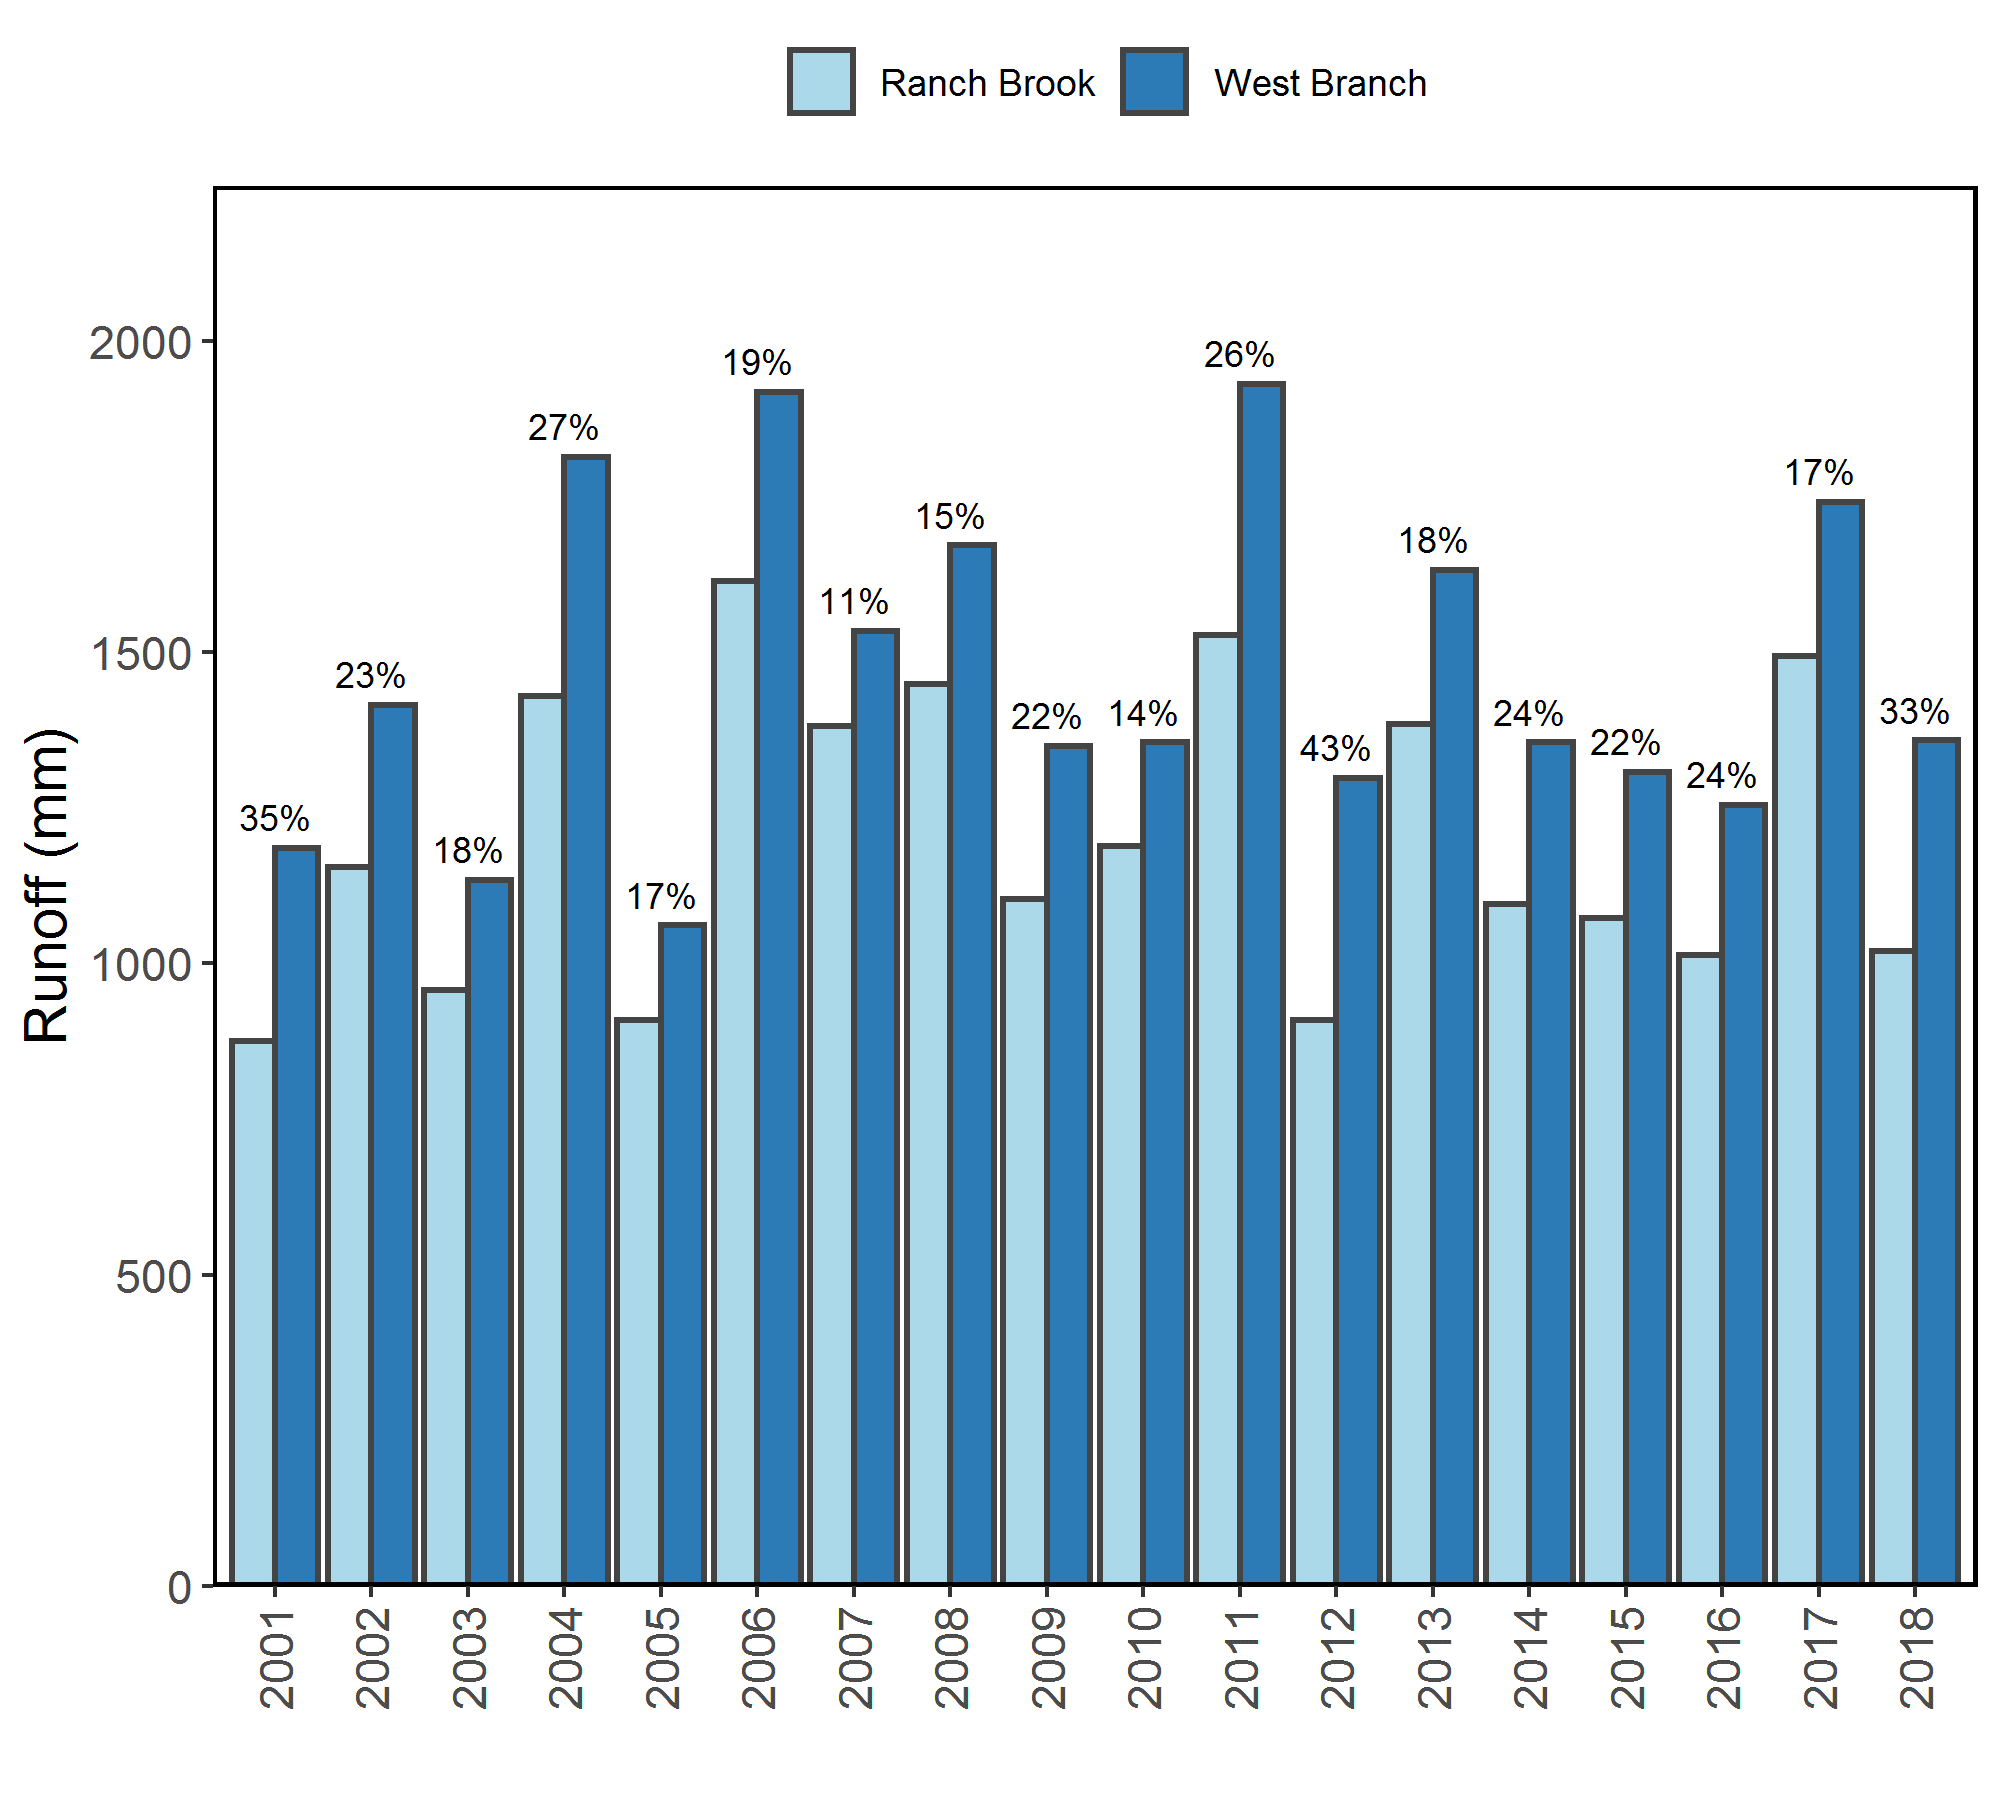 Figure 35. Annual runoff (mm) at Ranch Brook (light blue) and West Branch (dark blue) for the duration of study though the present report year (2001-2018). Percentage of greater runoff at WB relative to RB is given over each pair of bars.